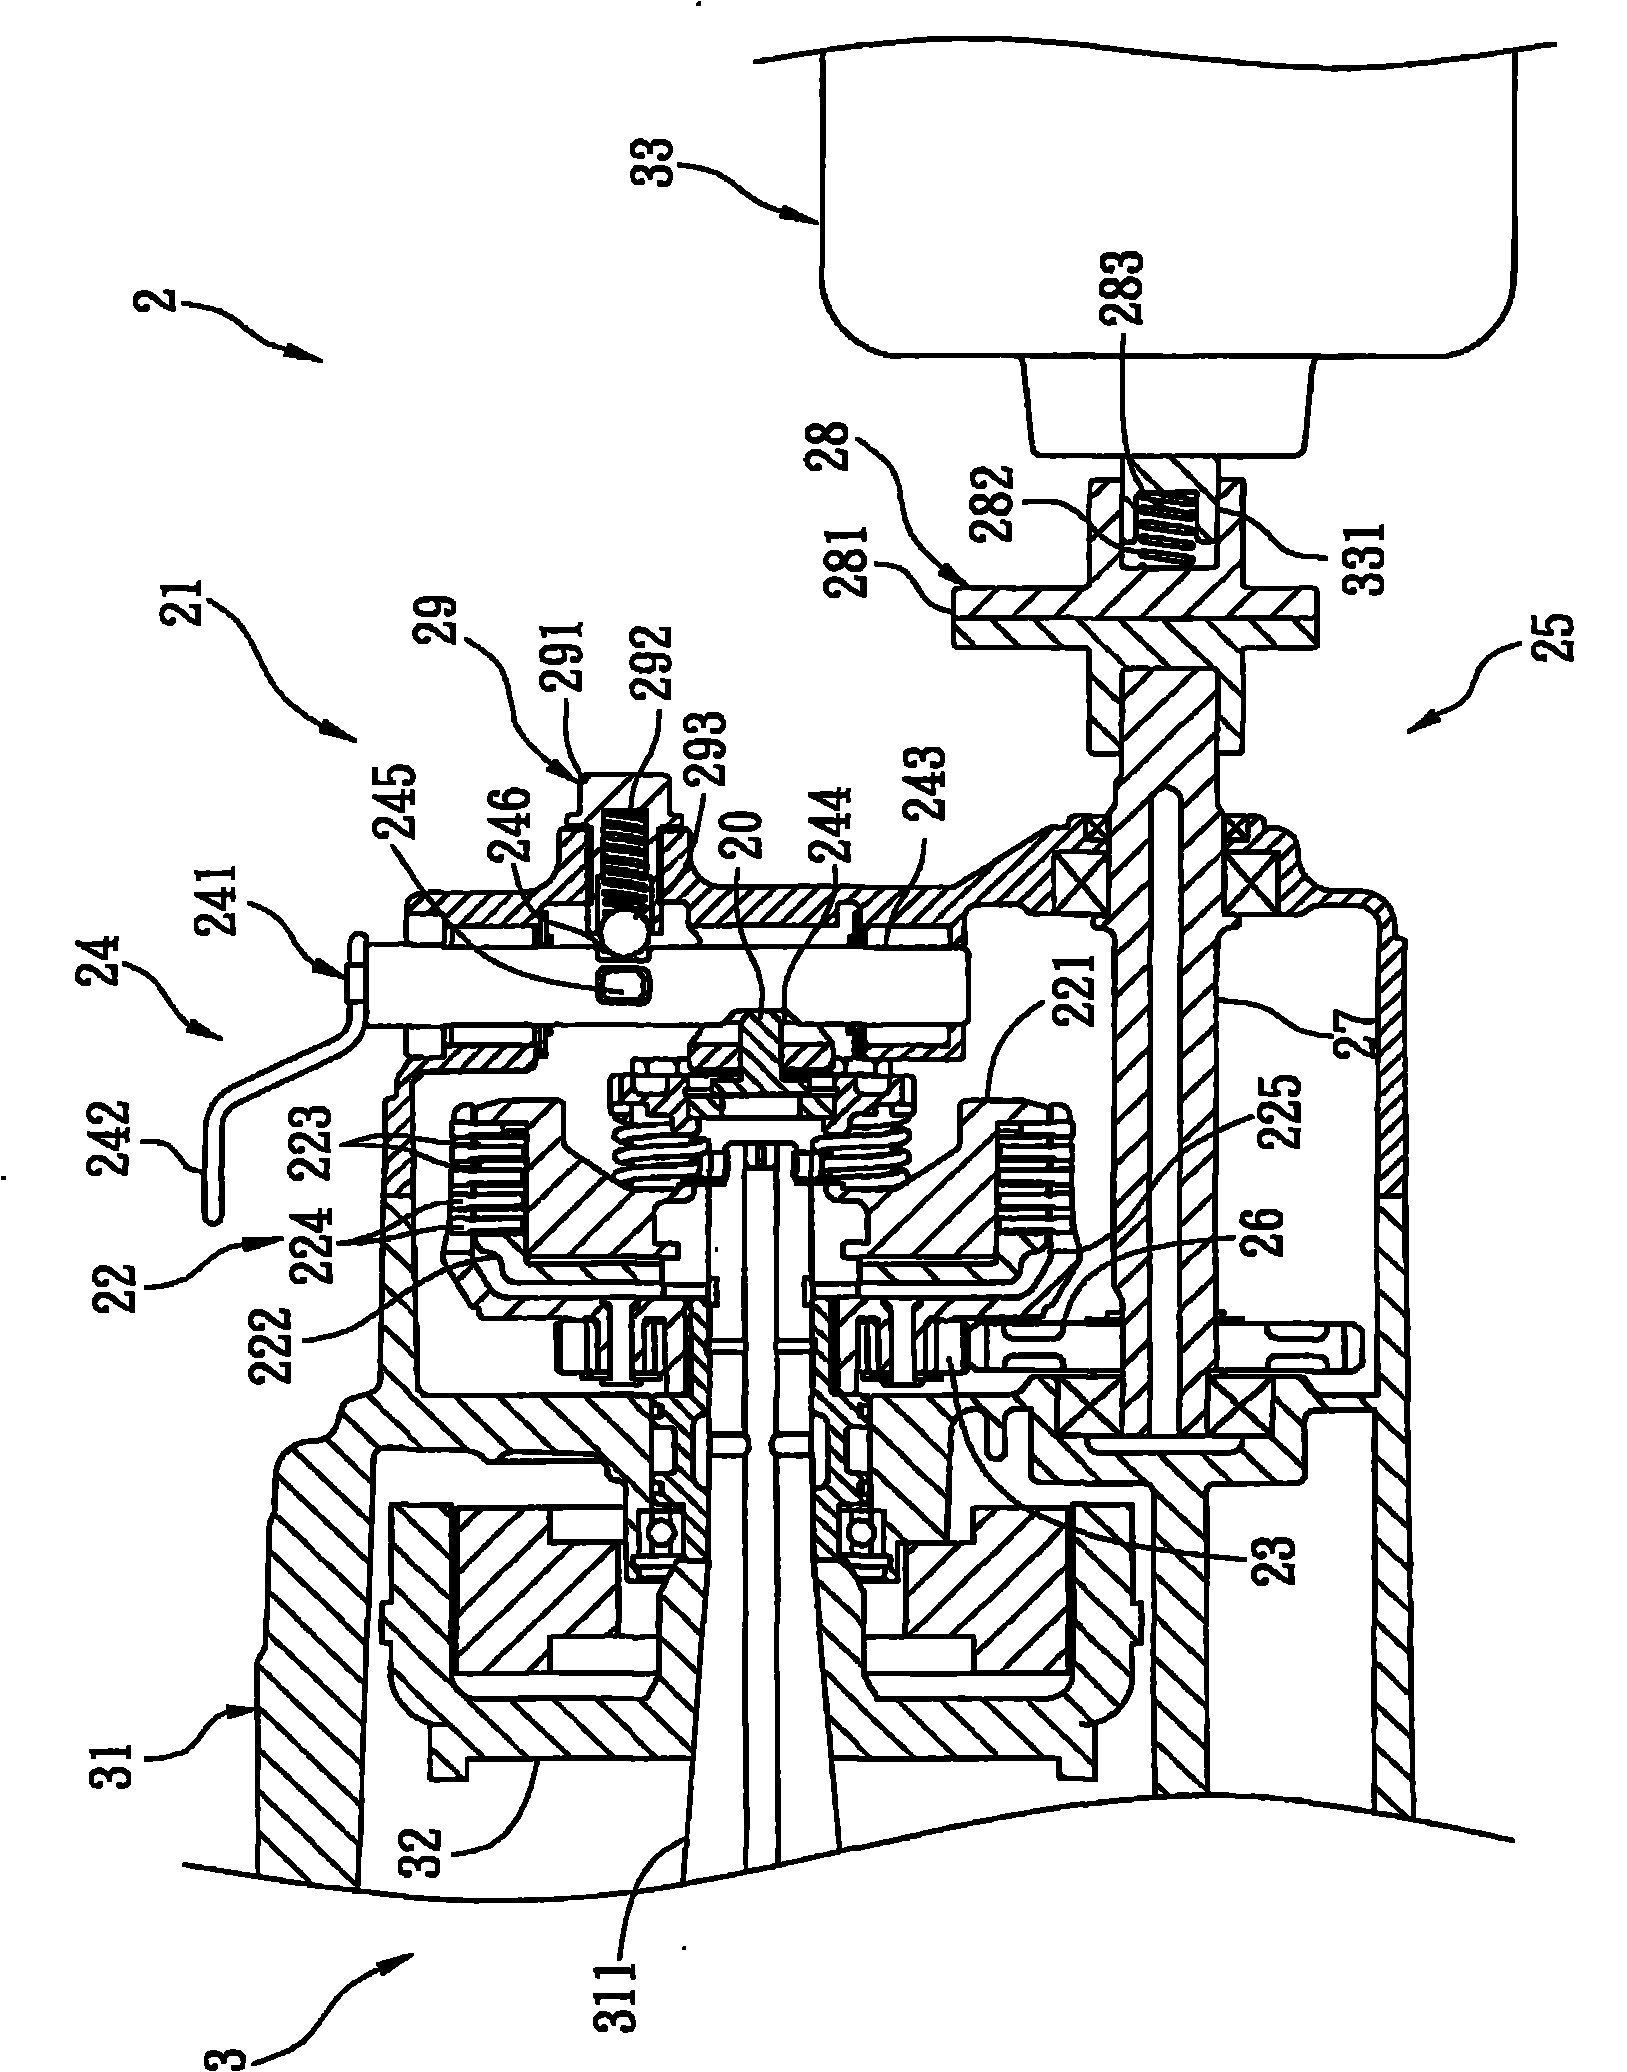 Power generation device of vehicle